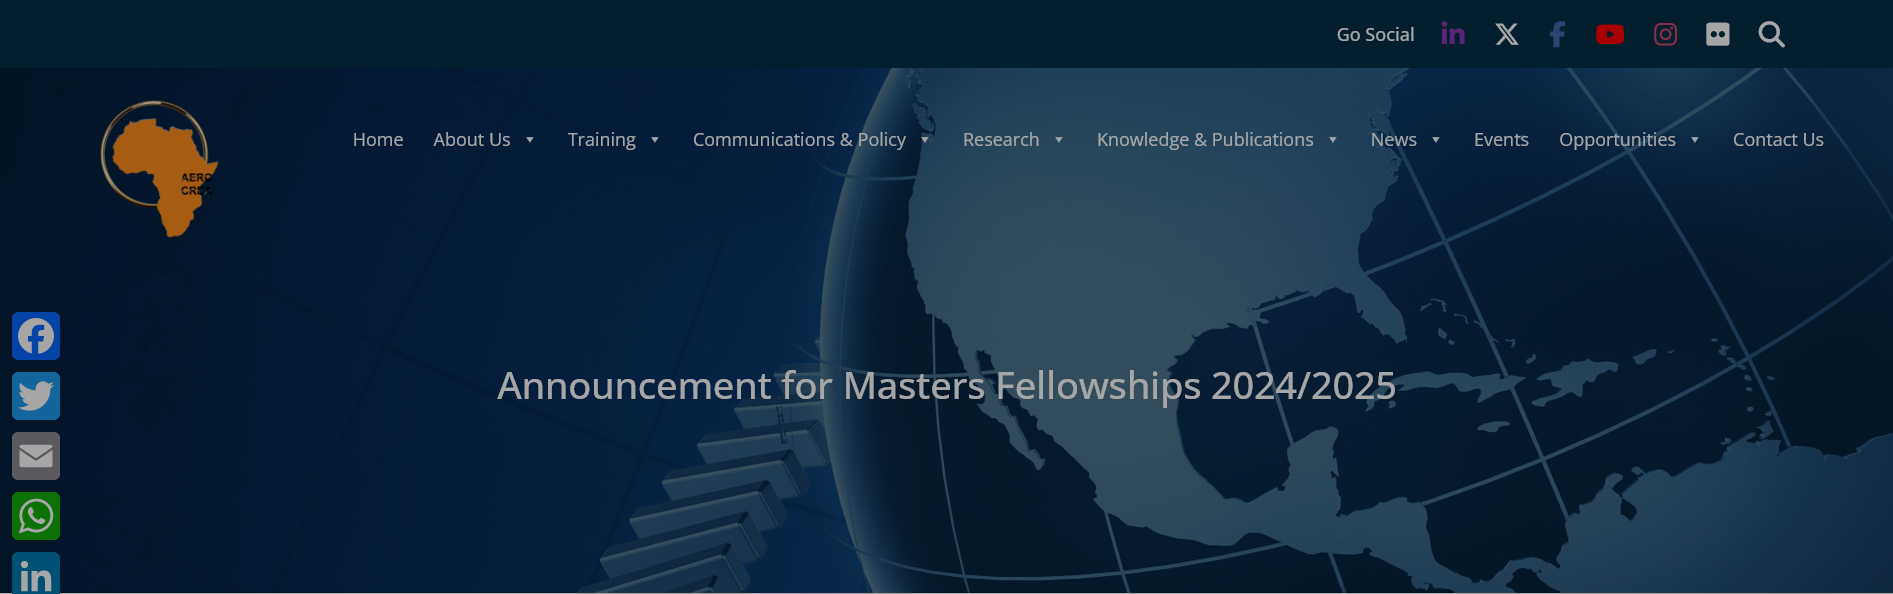 African Economic Research Consortium (AERC) Masters Fellowships 2024/2025